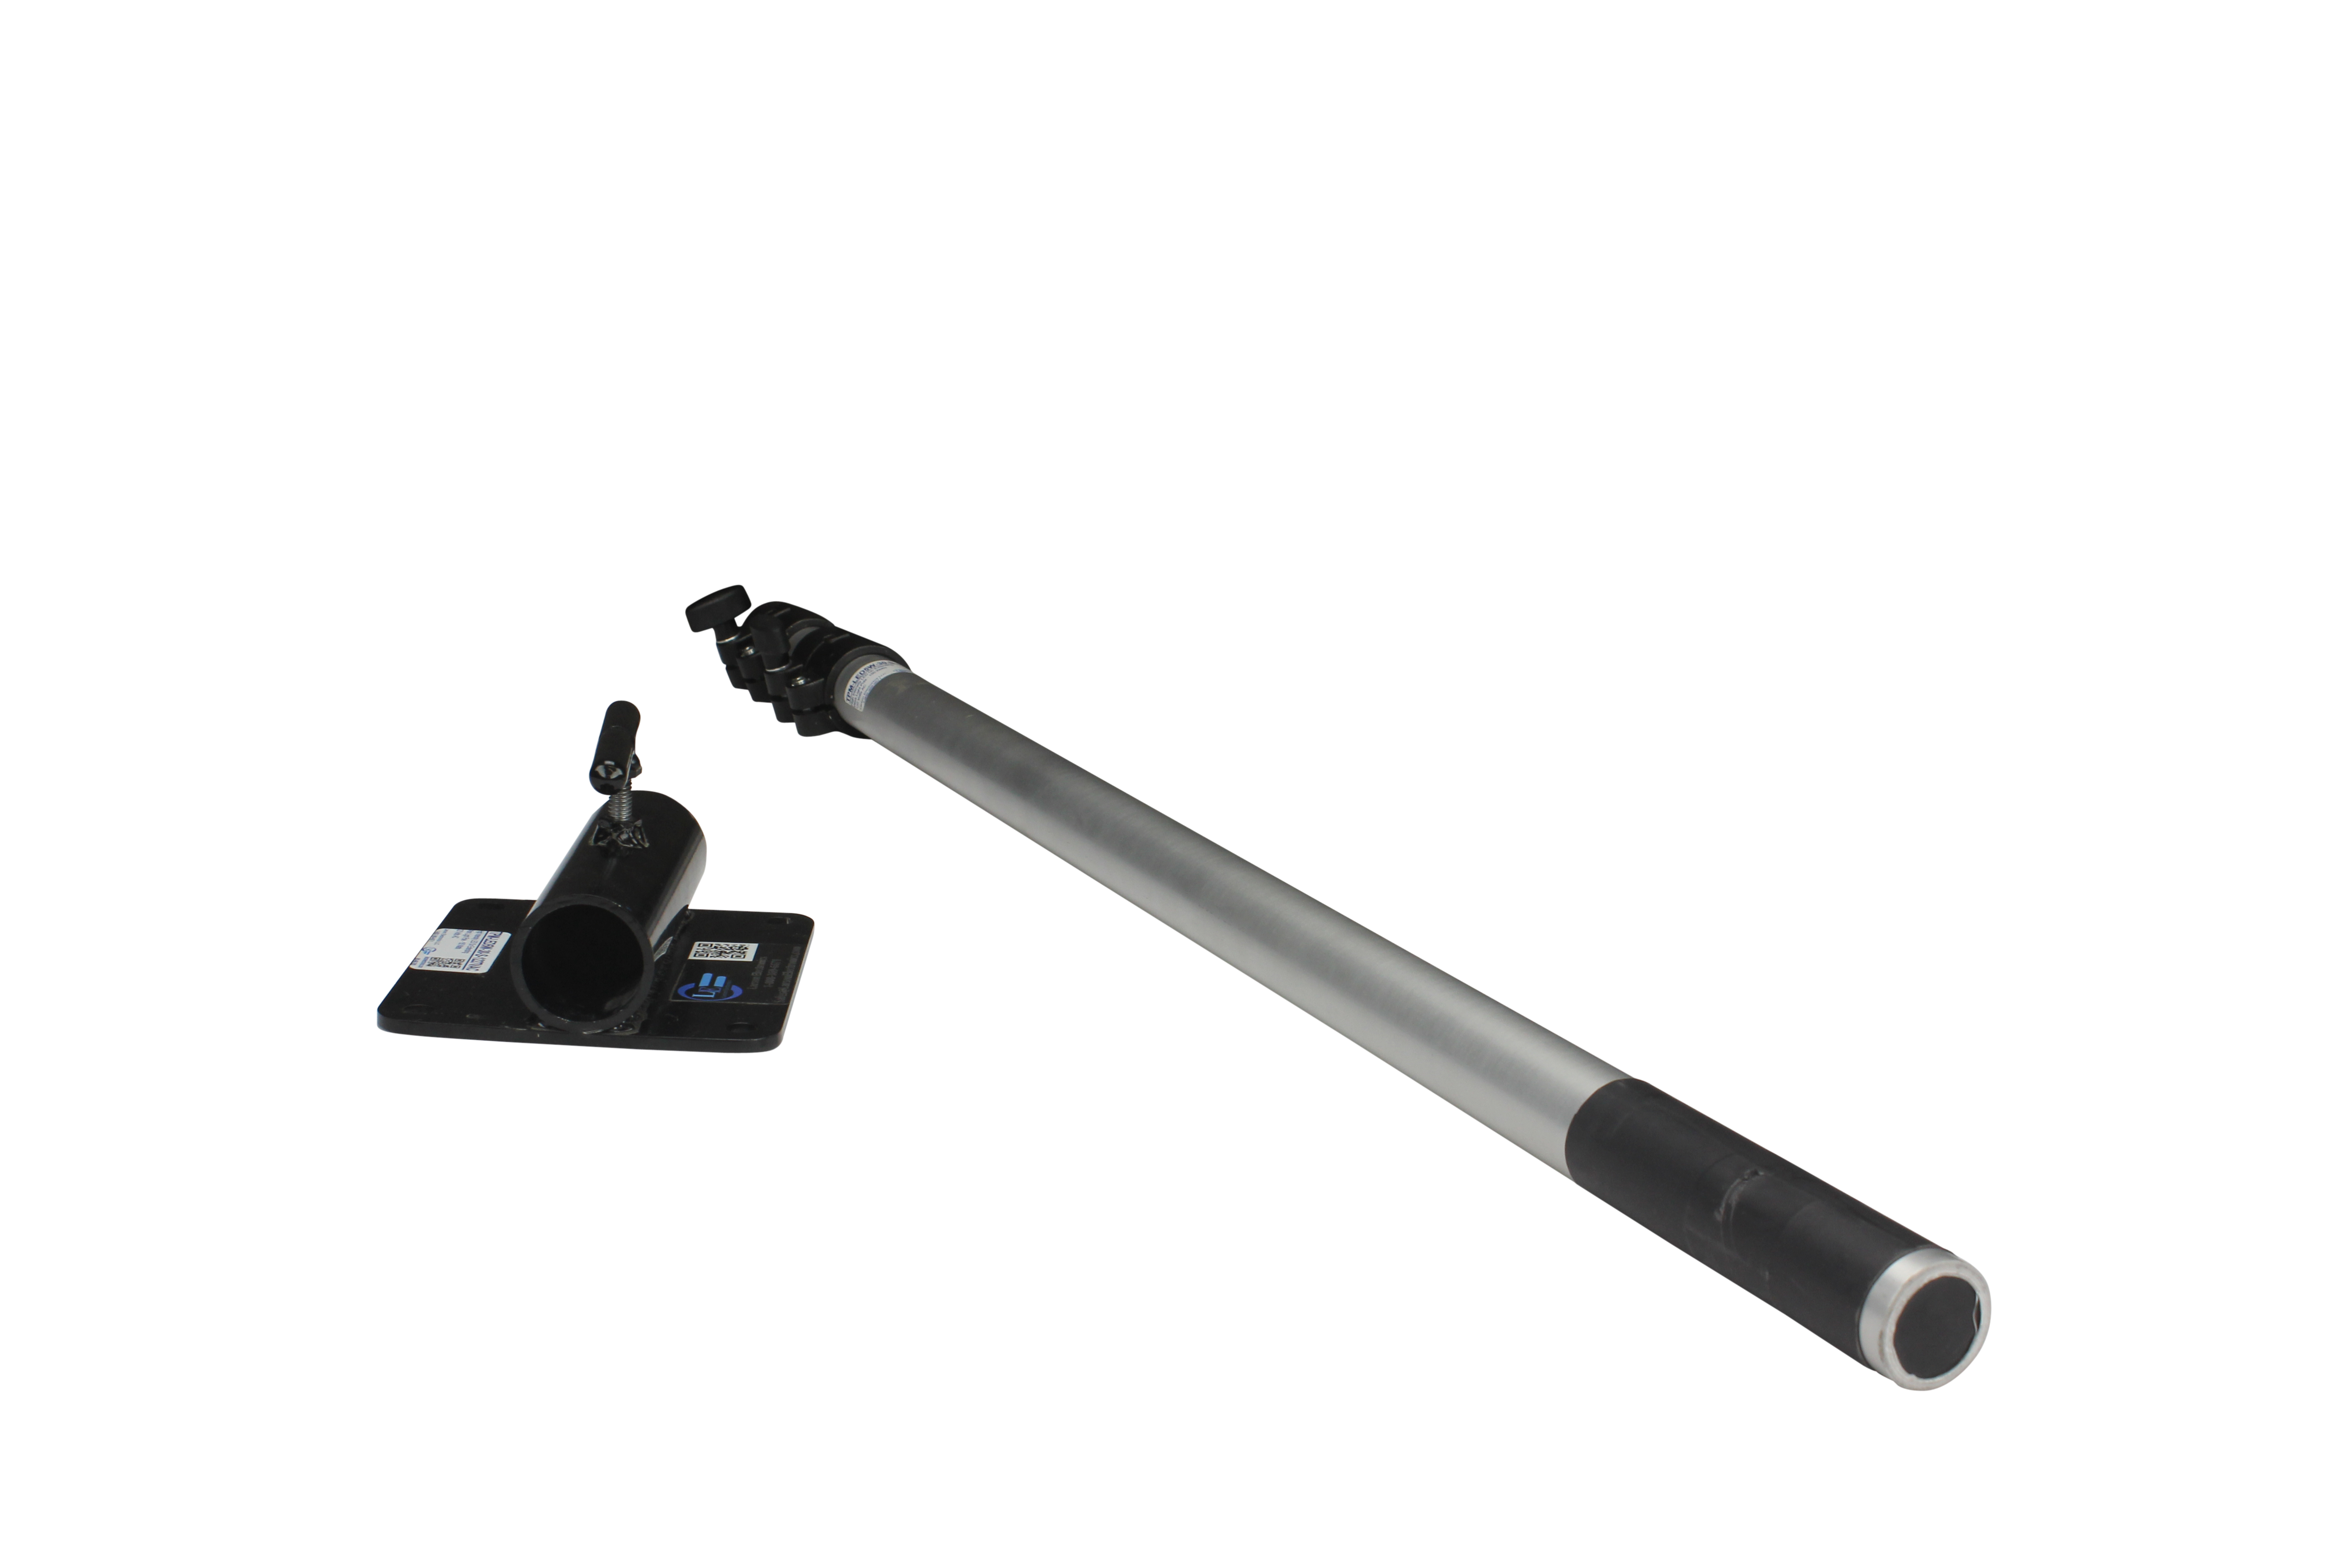 Telescoping Light Pole Equipped with a 36 Watt Remote Control Spotlight